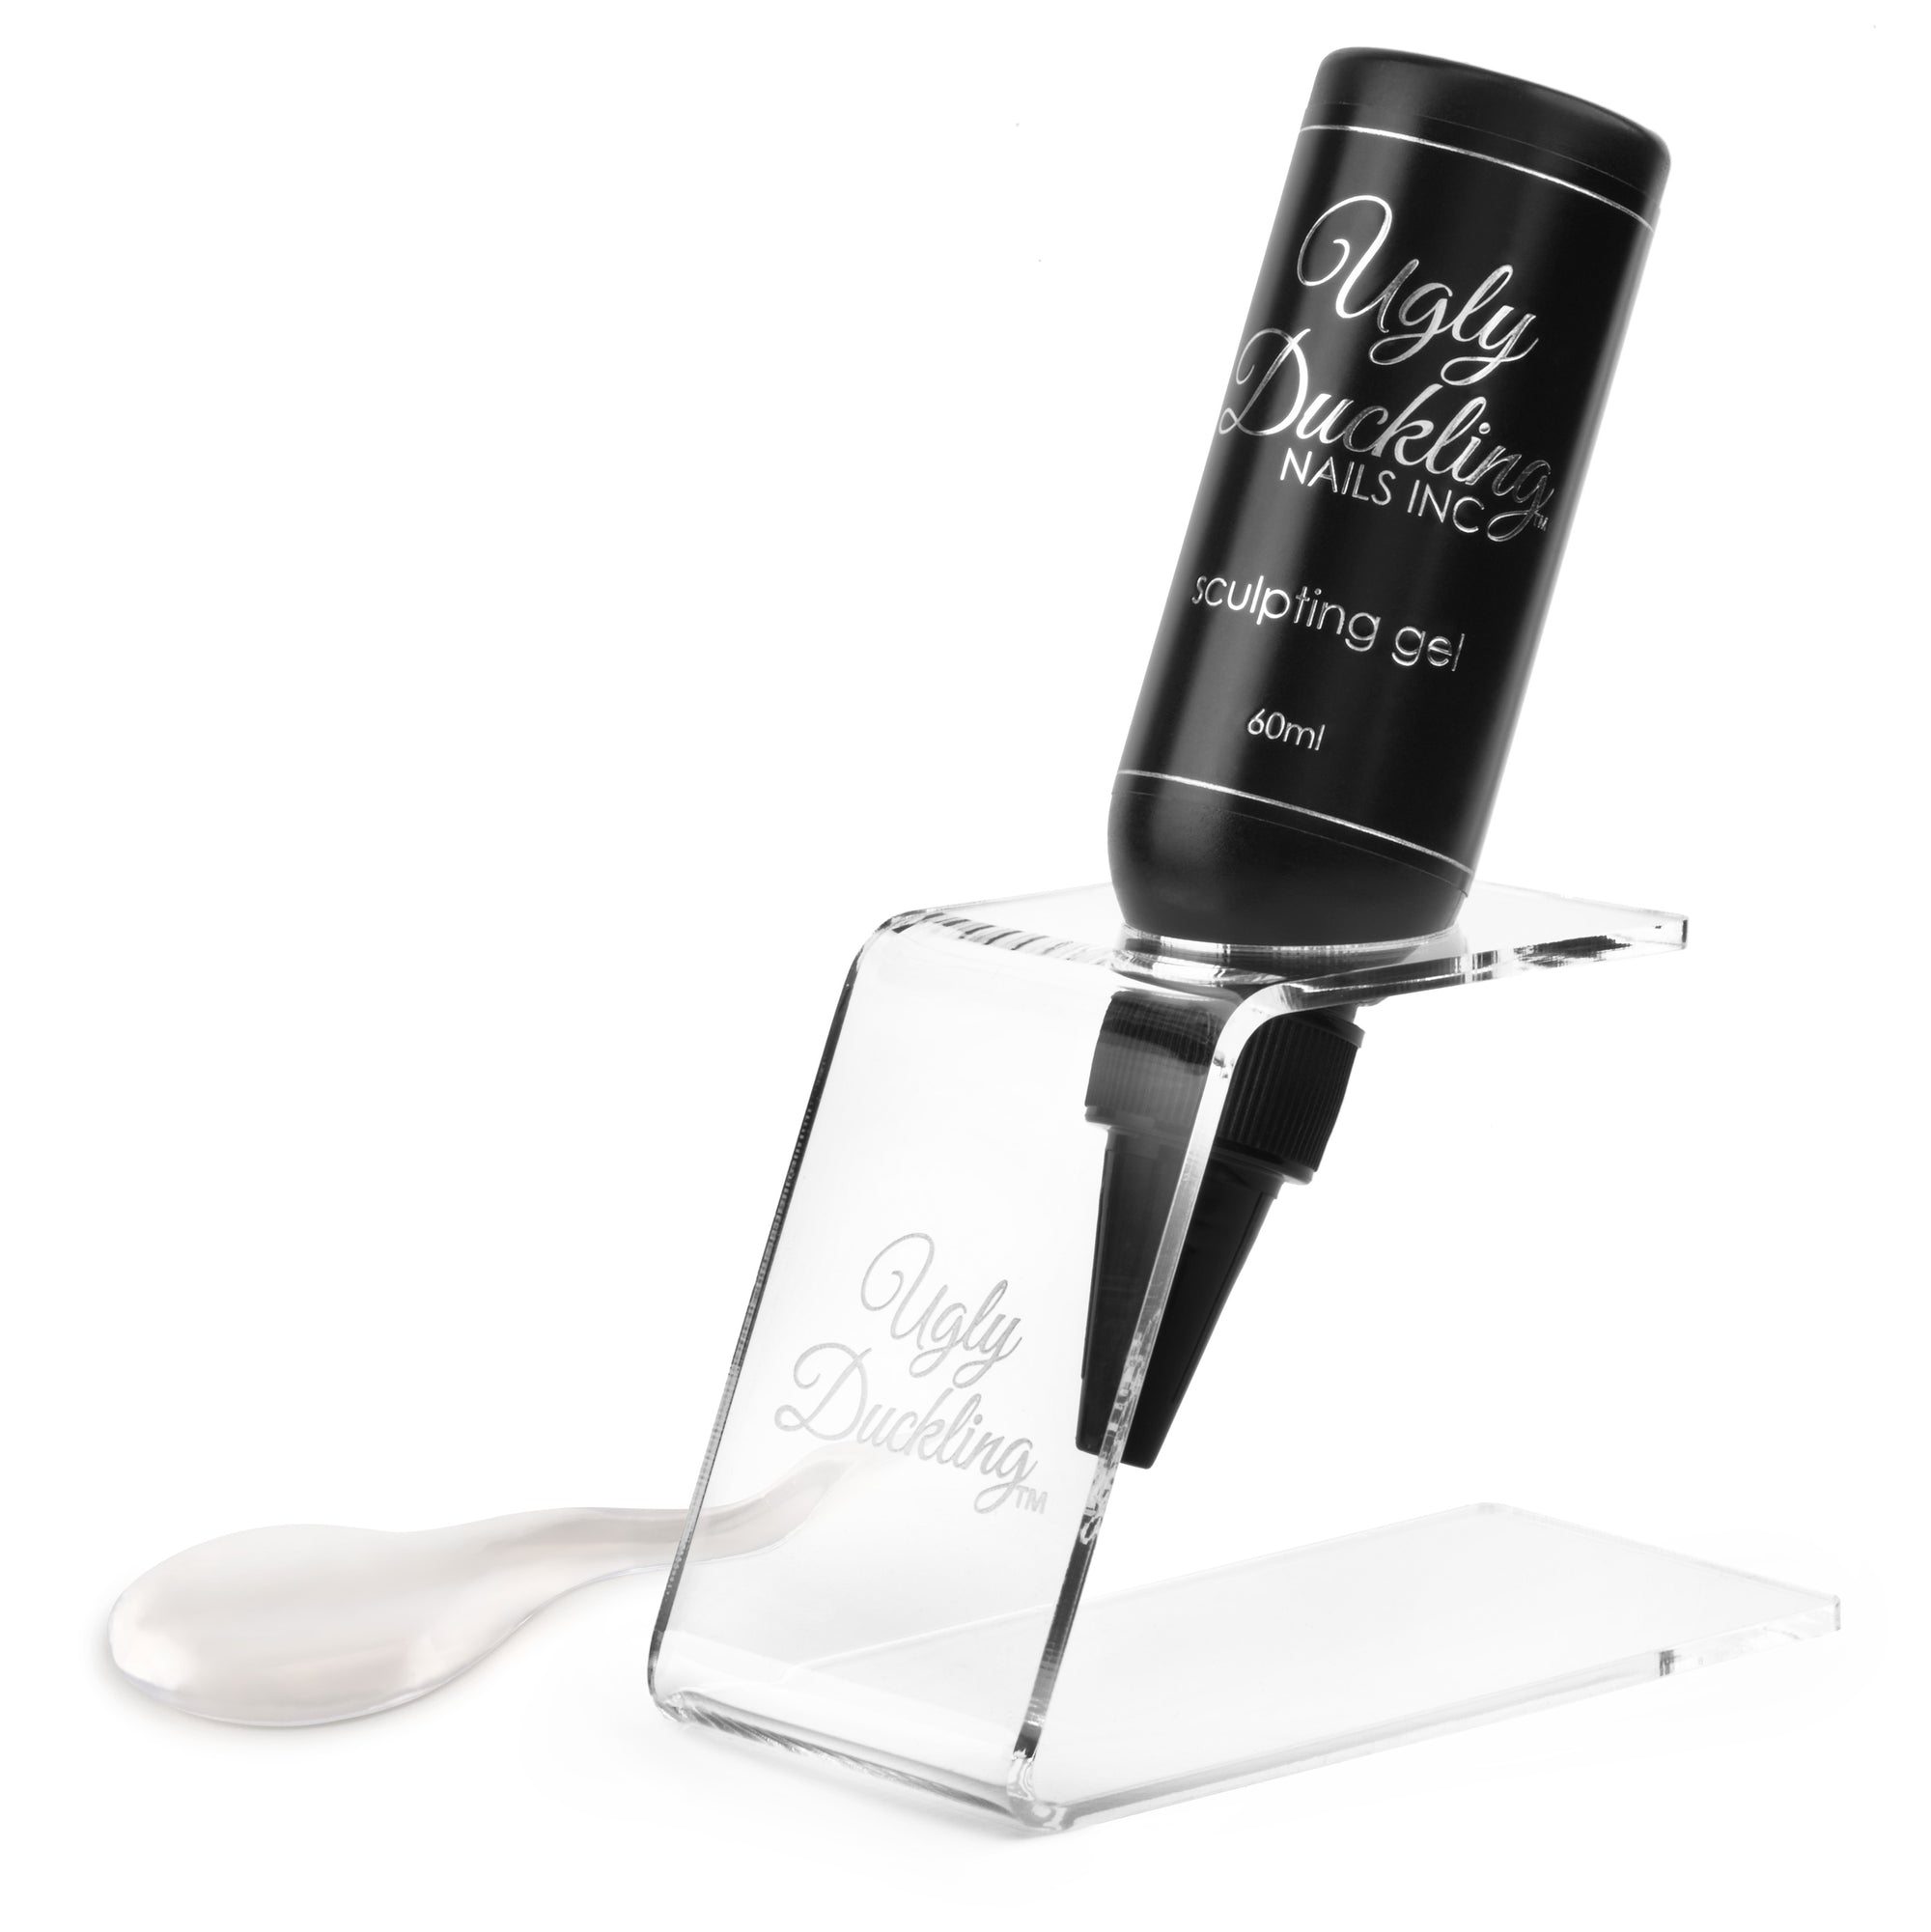 UD PREMIUM SCULPTING GEL - 60ml Squeeze Bottle (stand sold separately)